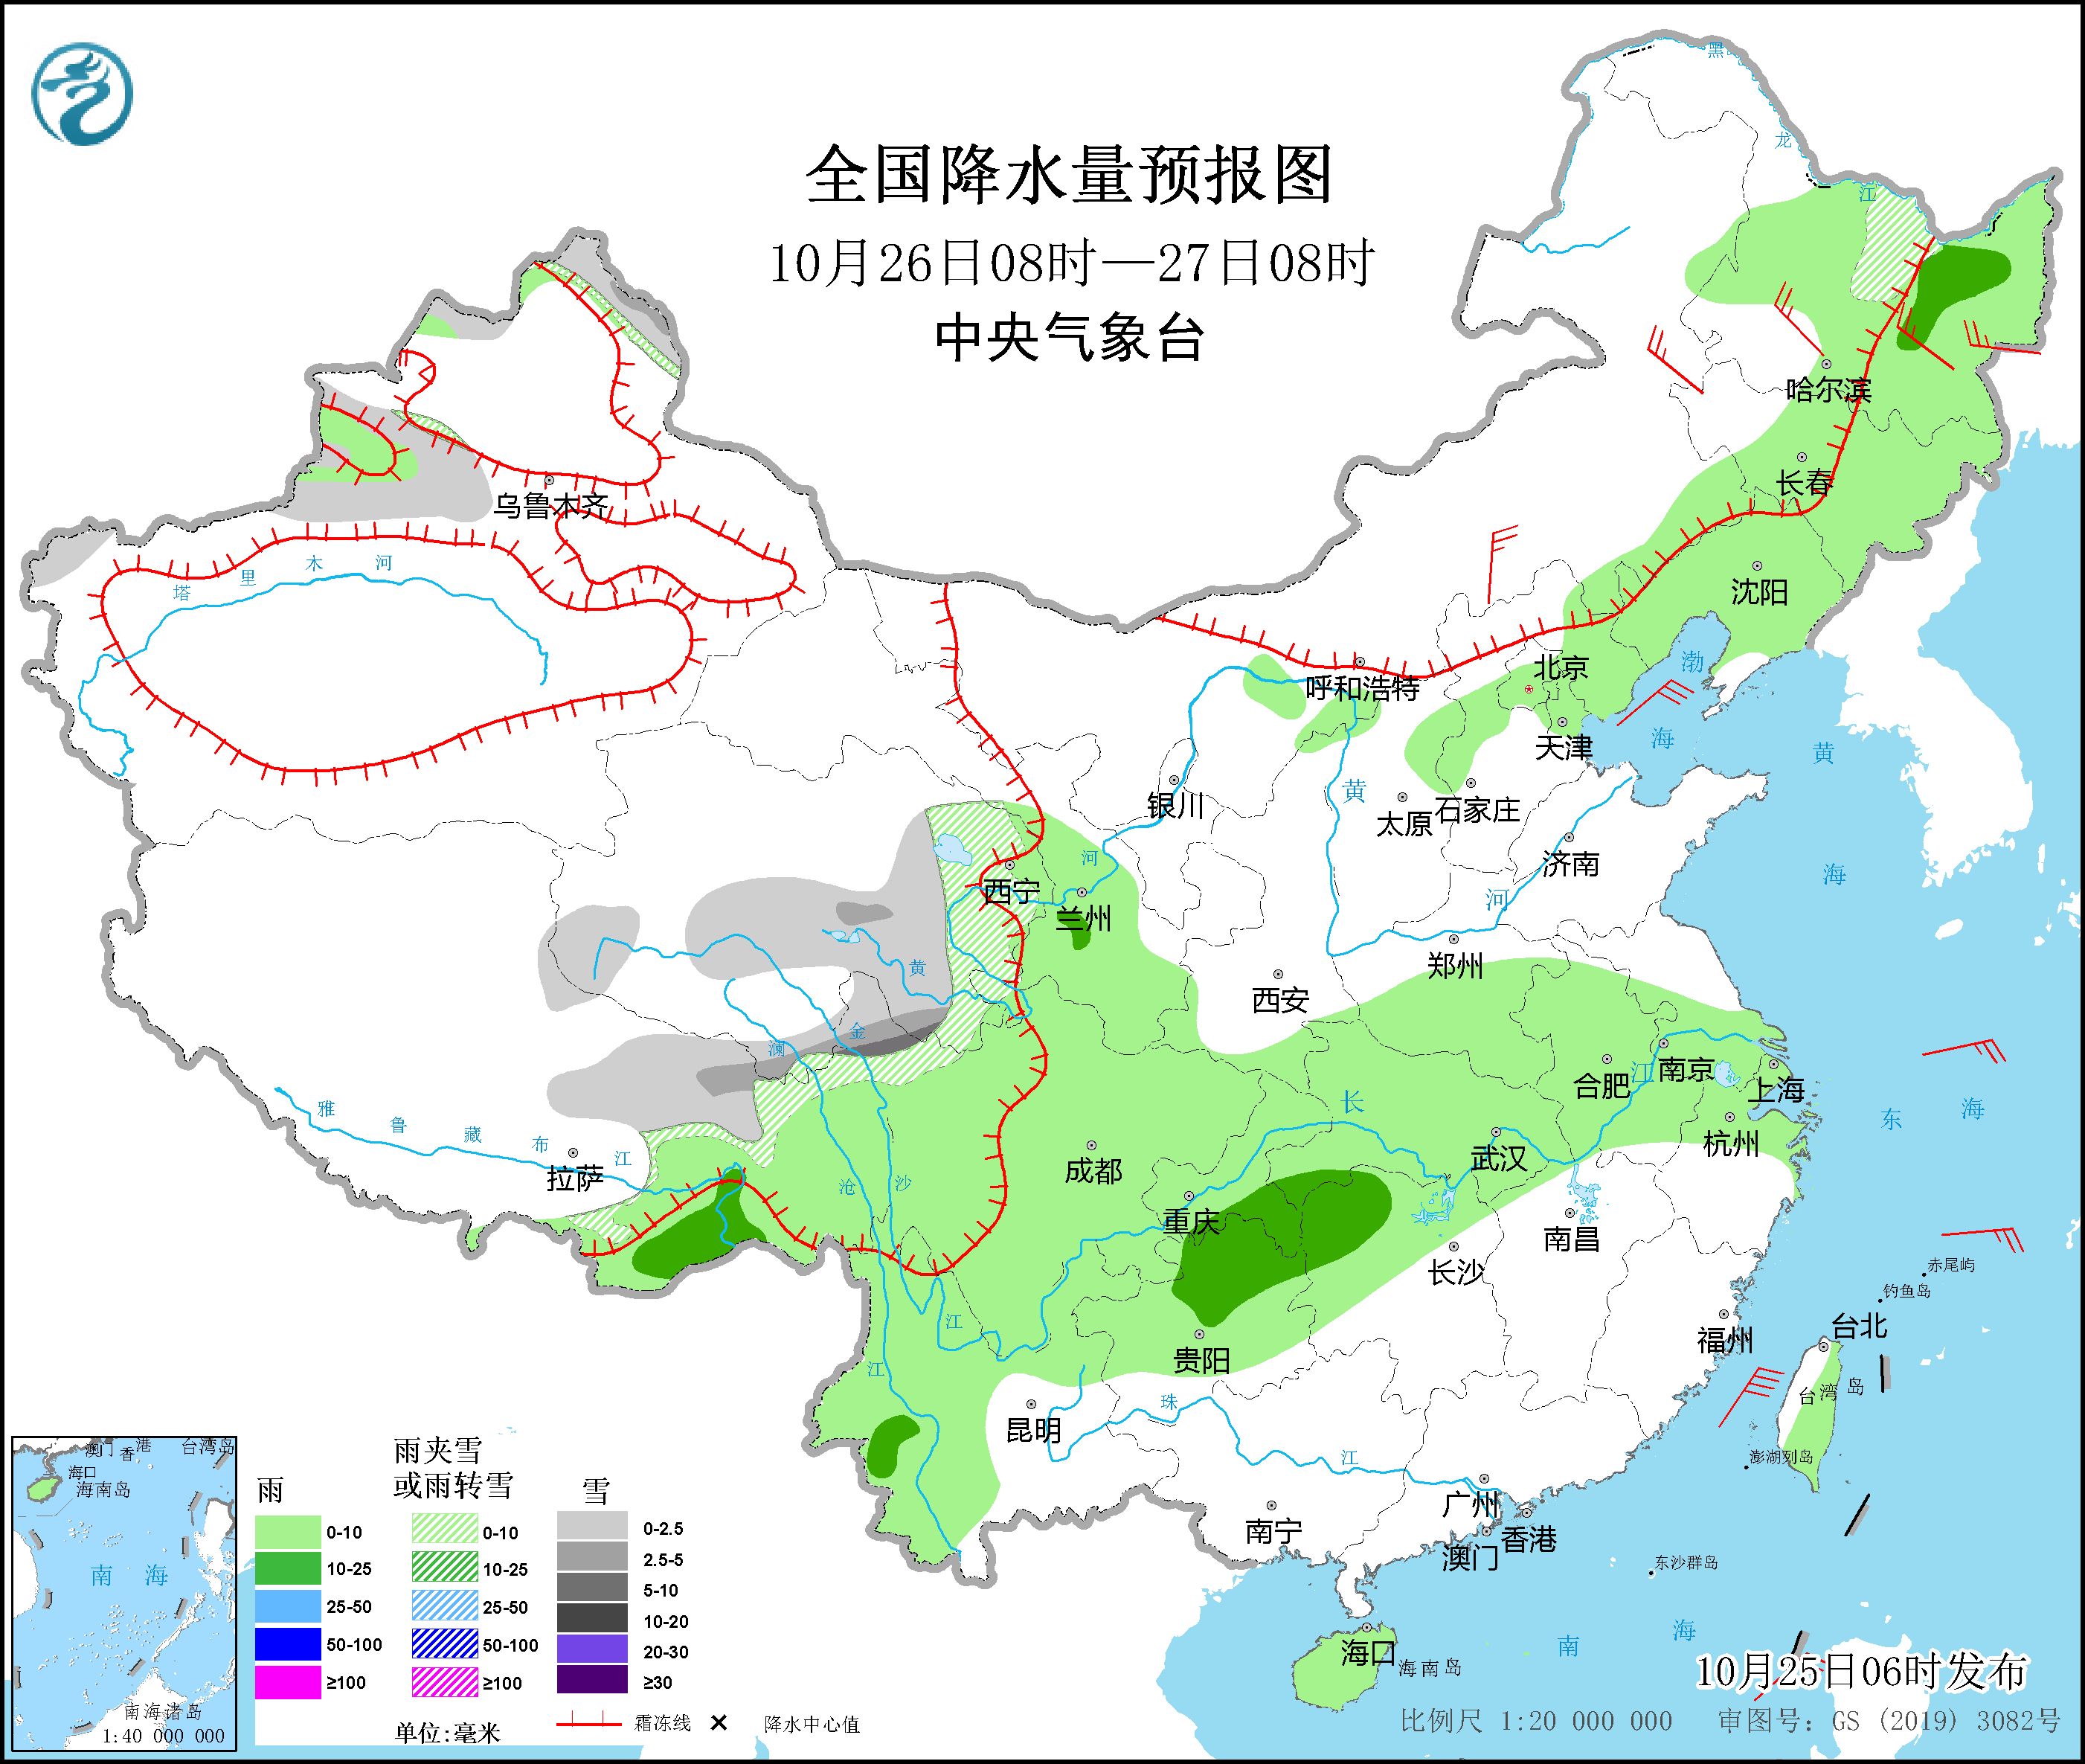 There is still strong rain and snow in the eastern part of the Qinghai-Tibet Plateau and cold air will affect North China and Northeast China